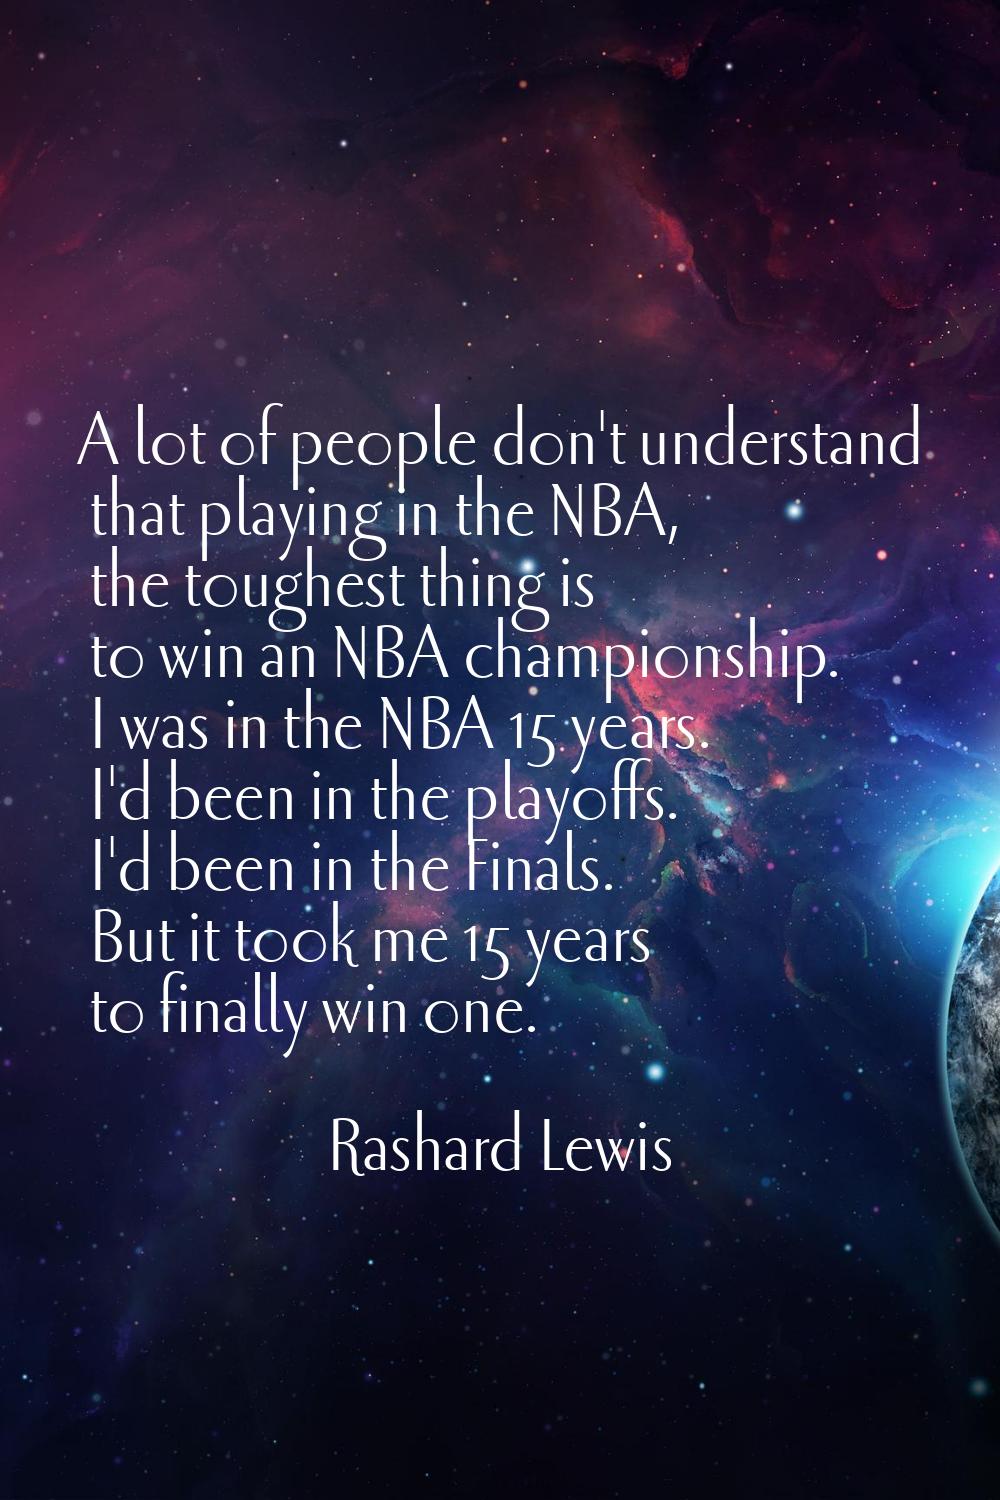 A lot of people don't understand that playing in the NBA, the toughest thing is to win an NBA champ